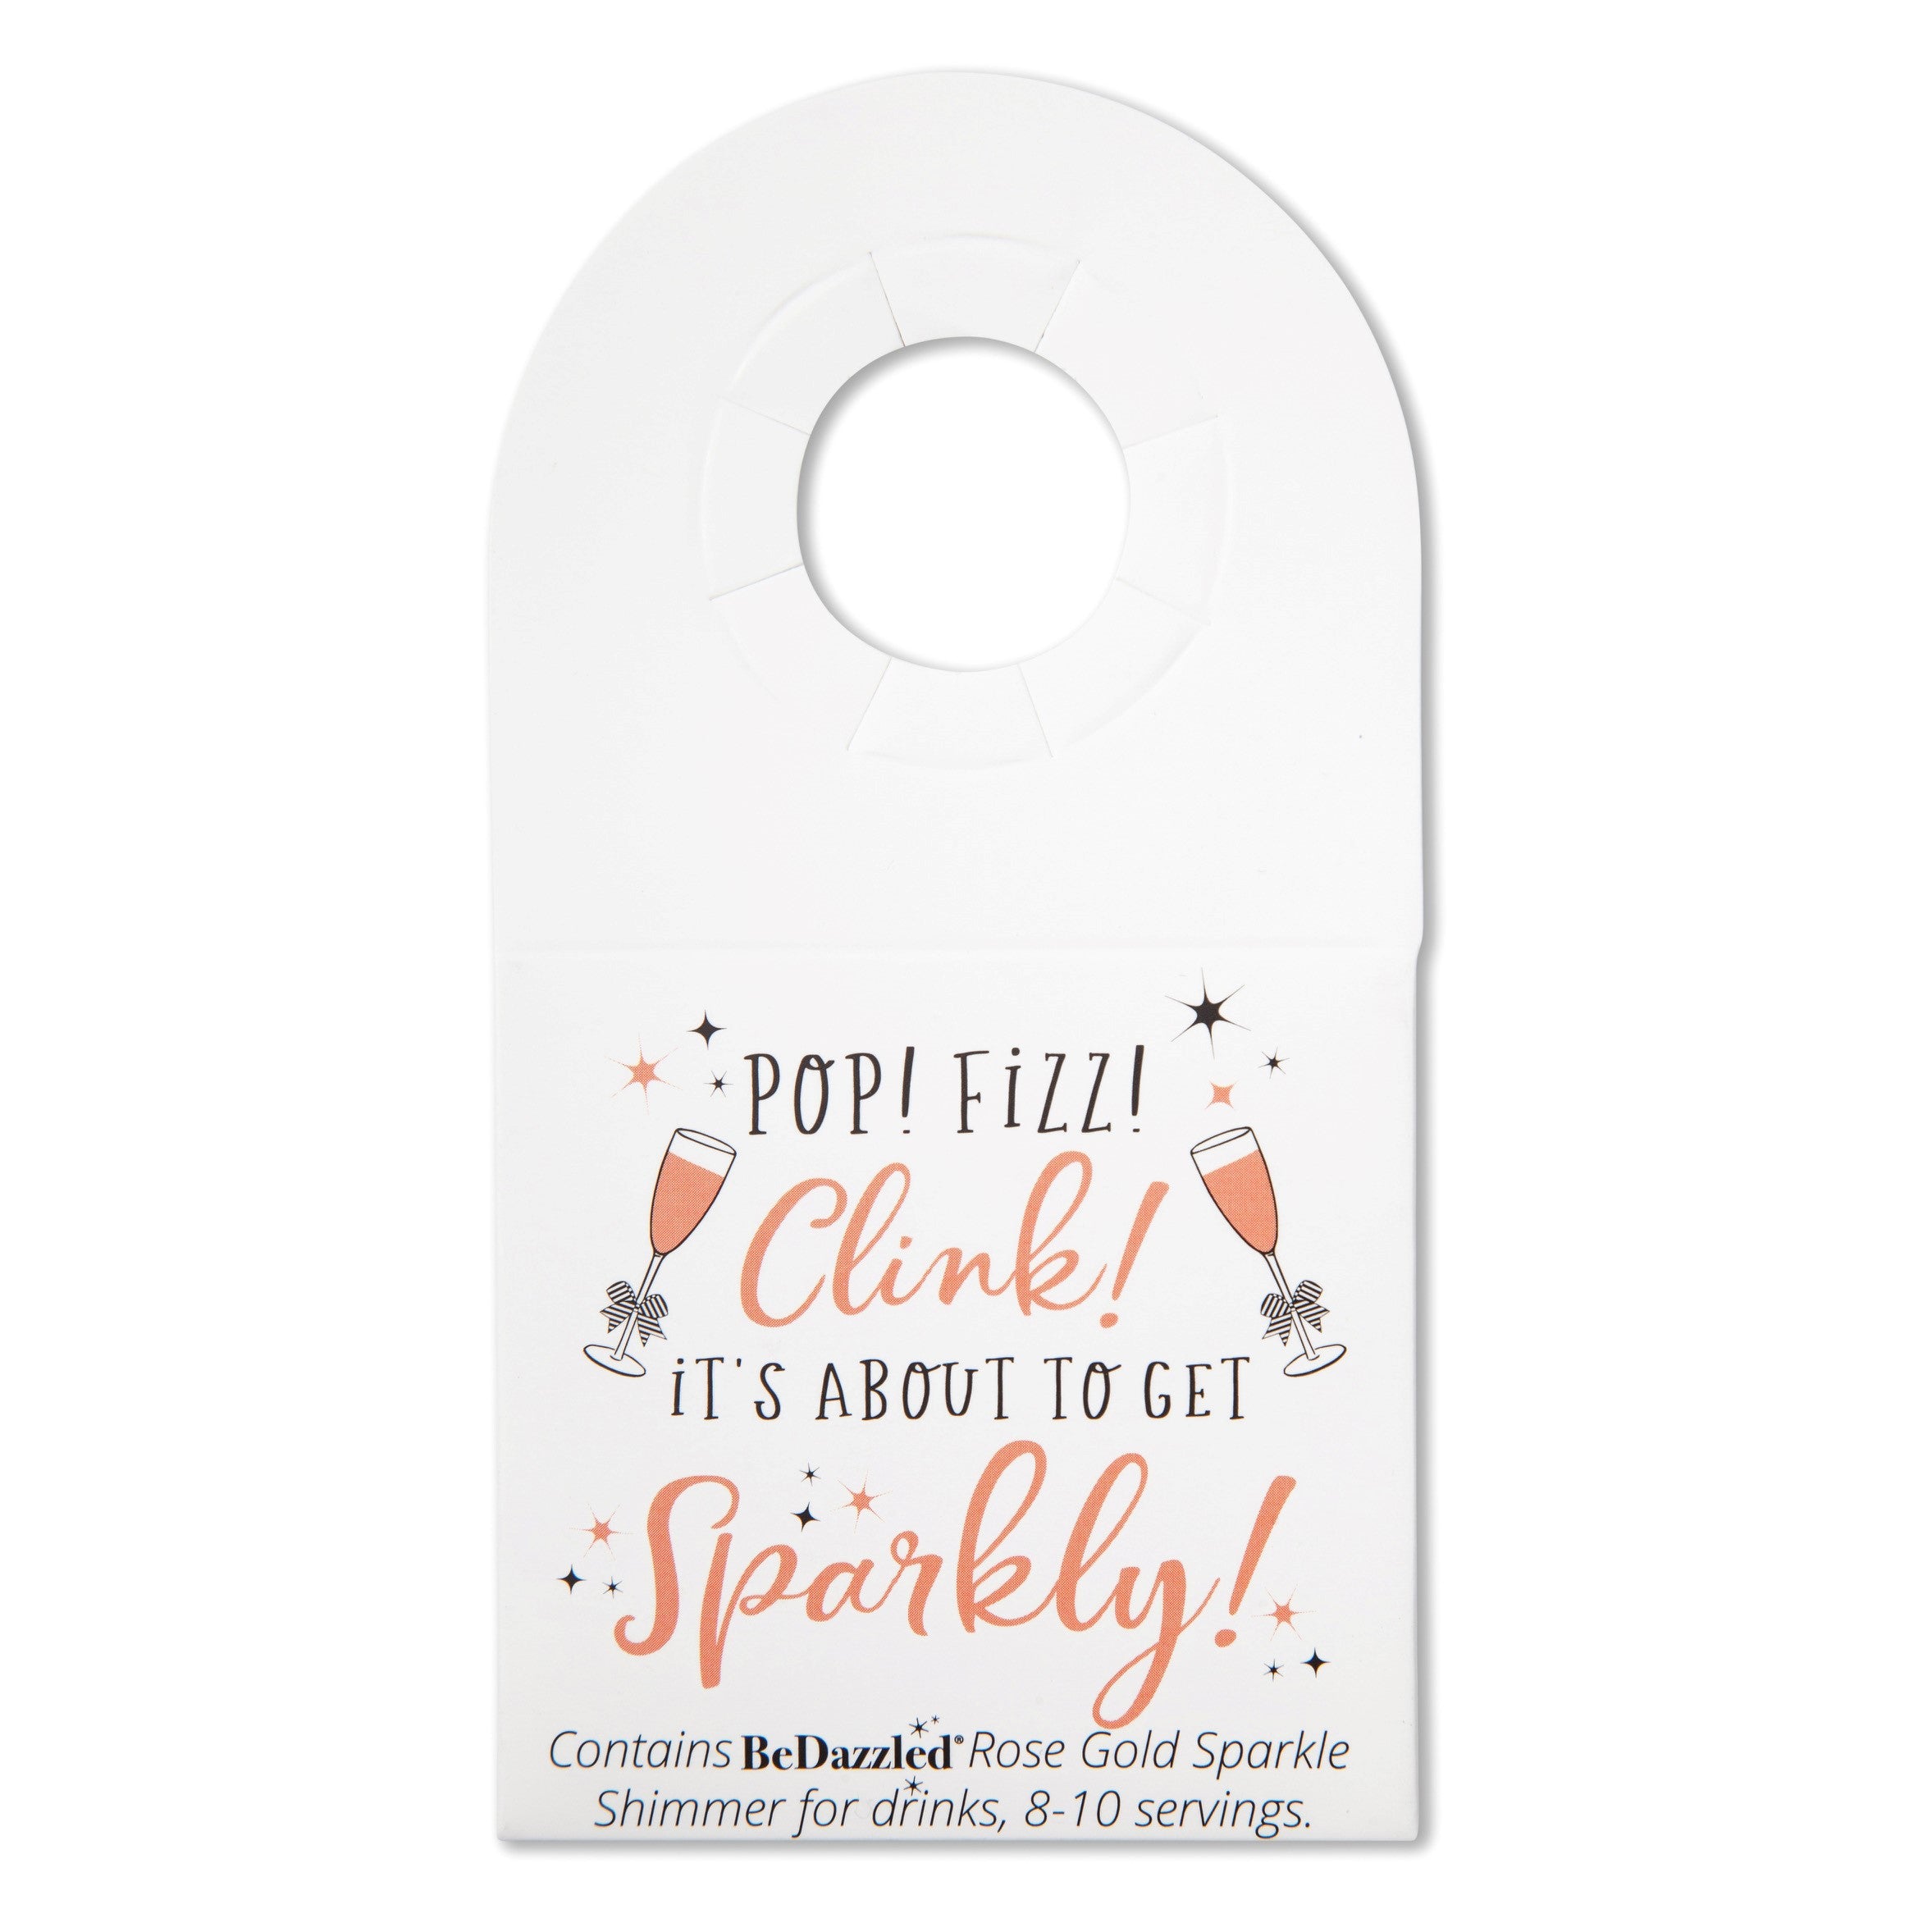 Pop! Fizz! Clink! It's about to get Sparkly! - bottle neck gift tag containing ROSE GOLD shimmer